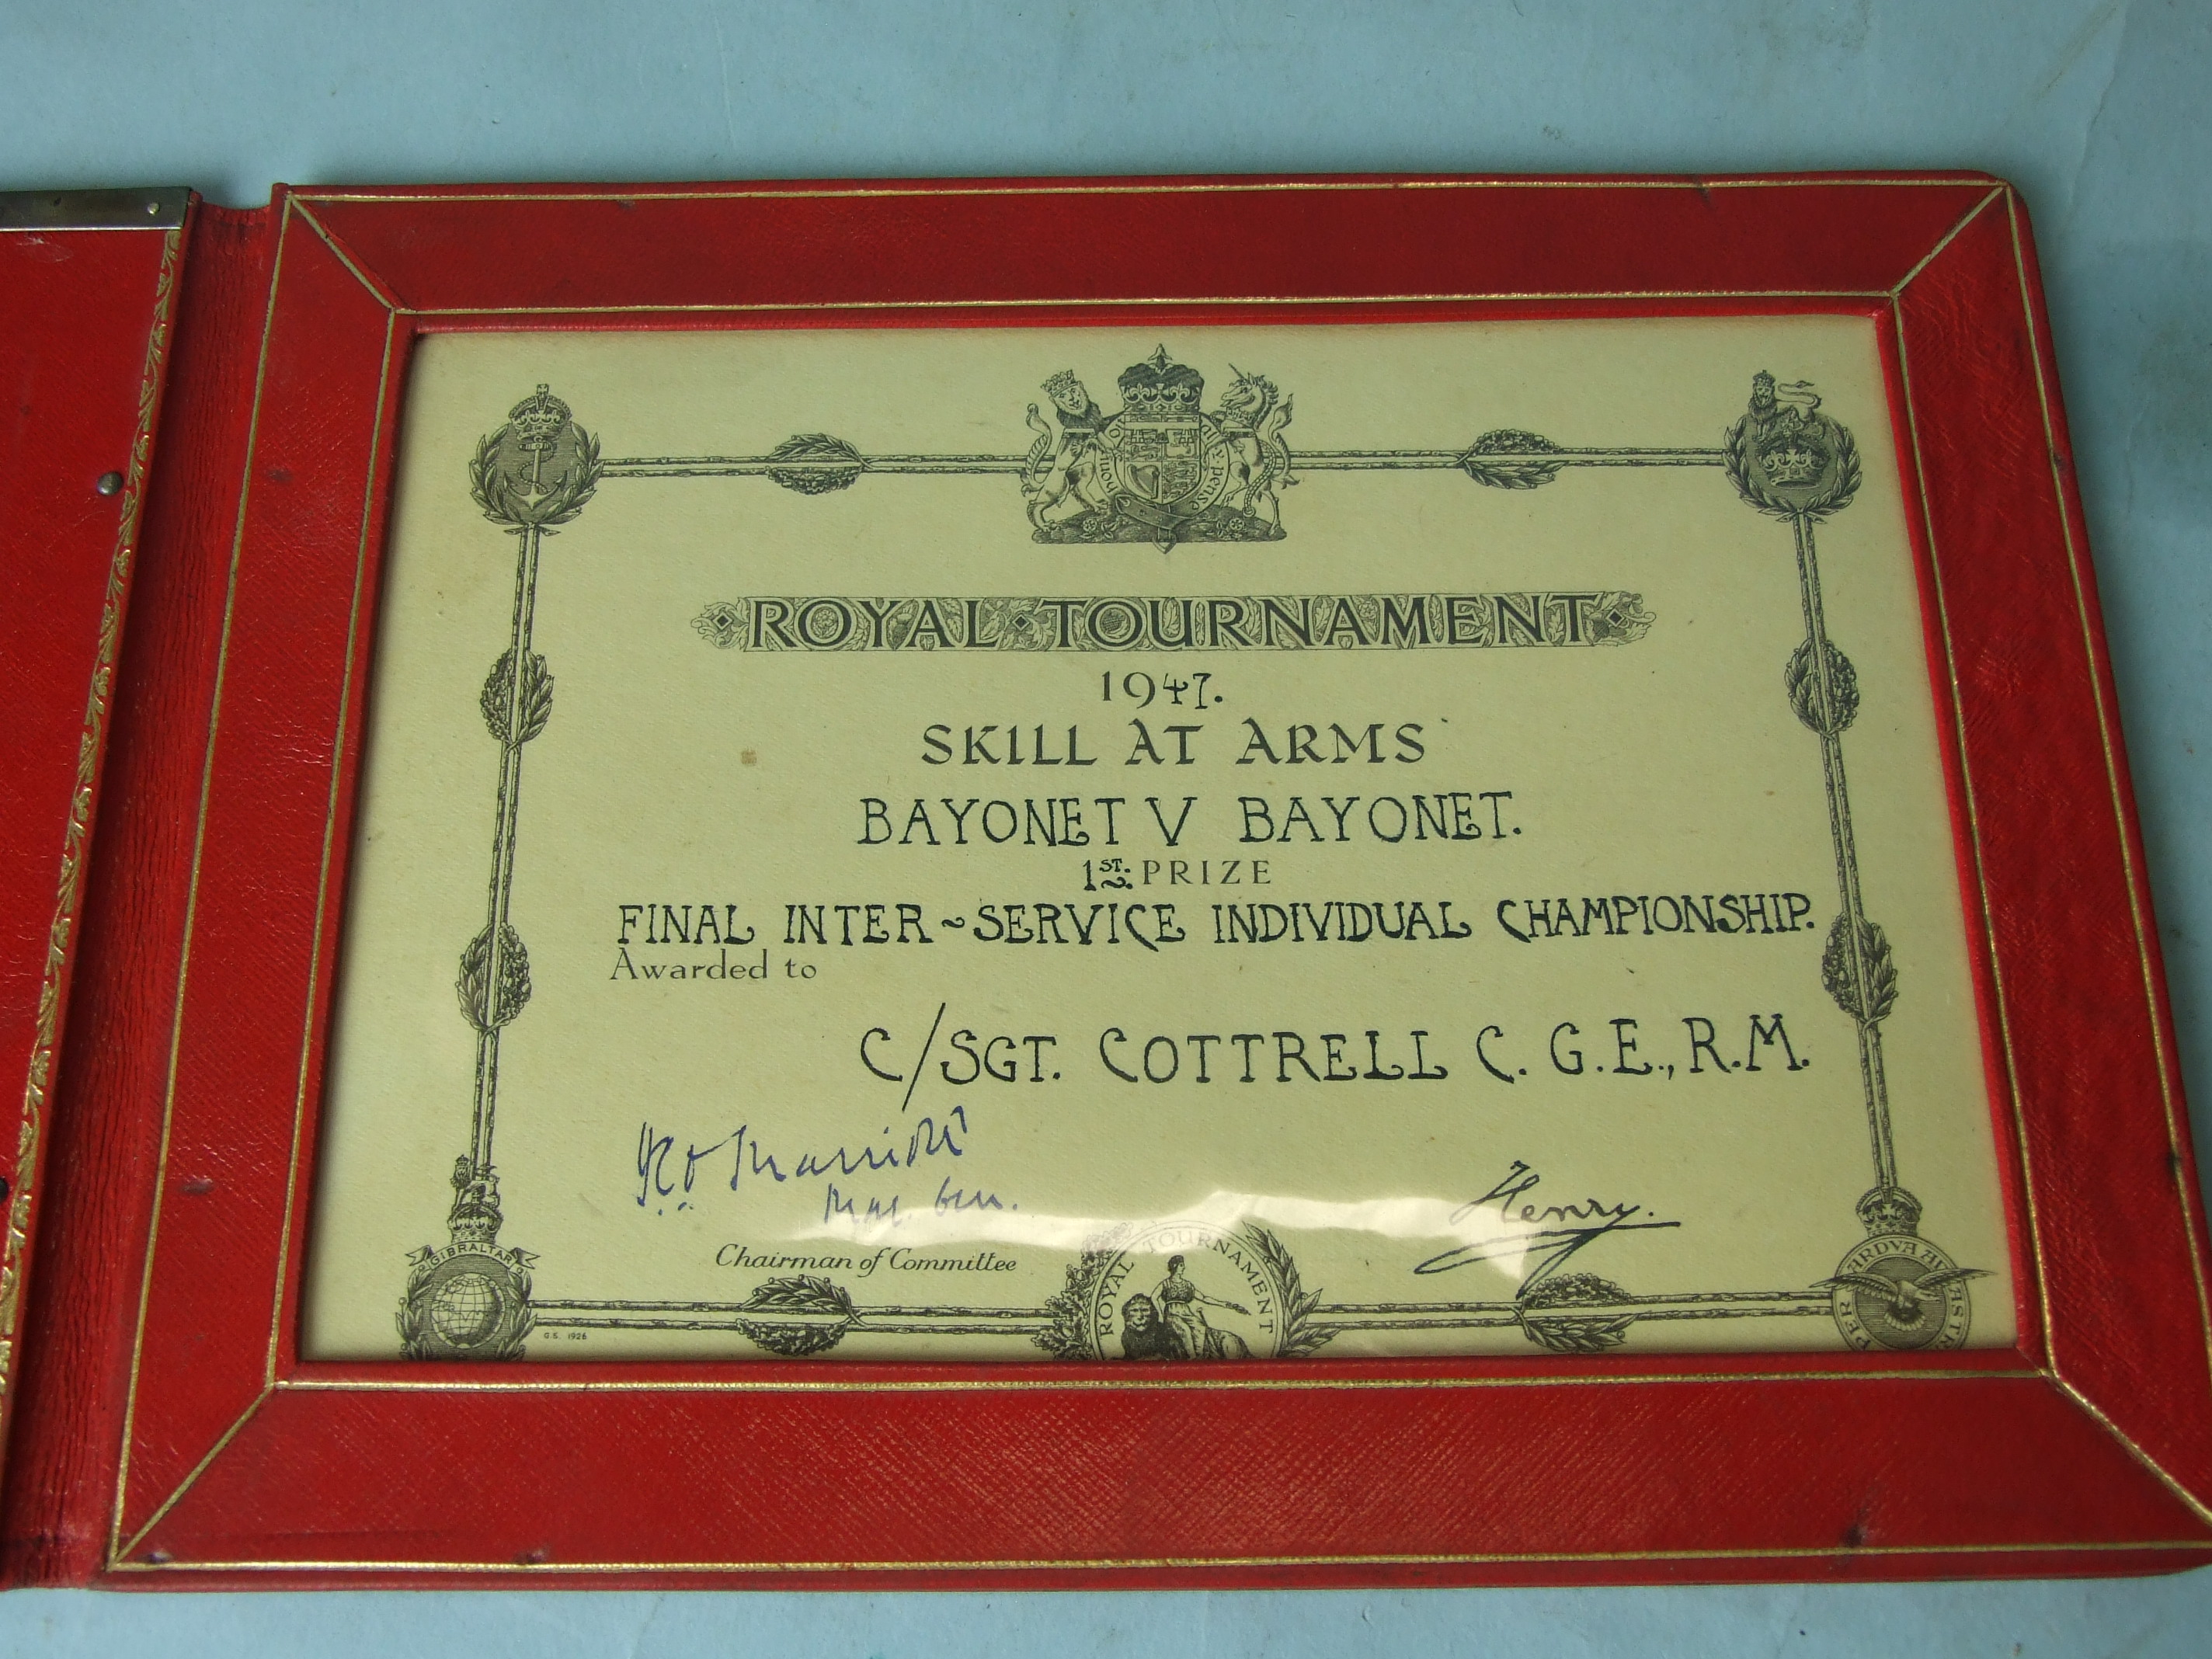 A Royal Tournament 1947 trophy awarded to C/Sgt C G E Cotterell RM in the form of a silver rifle and - Image 2 of 2